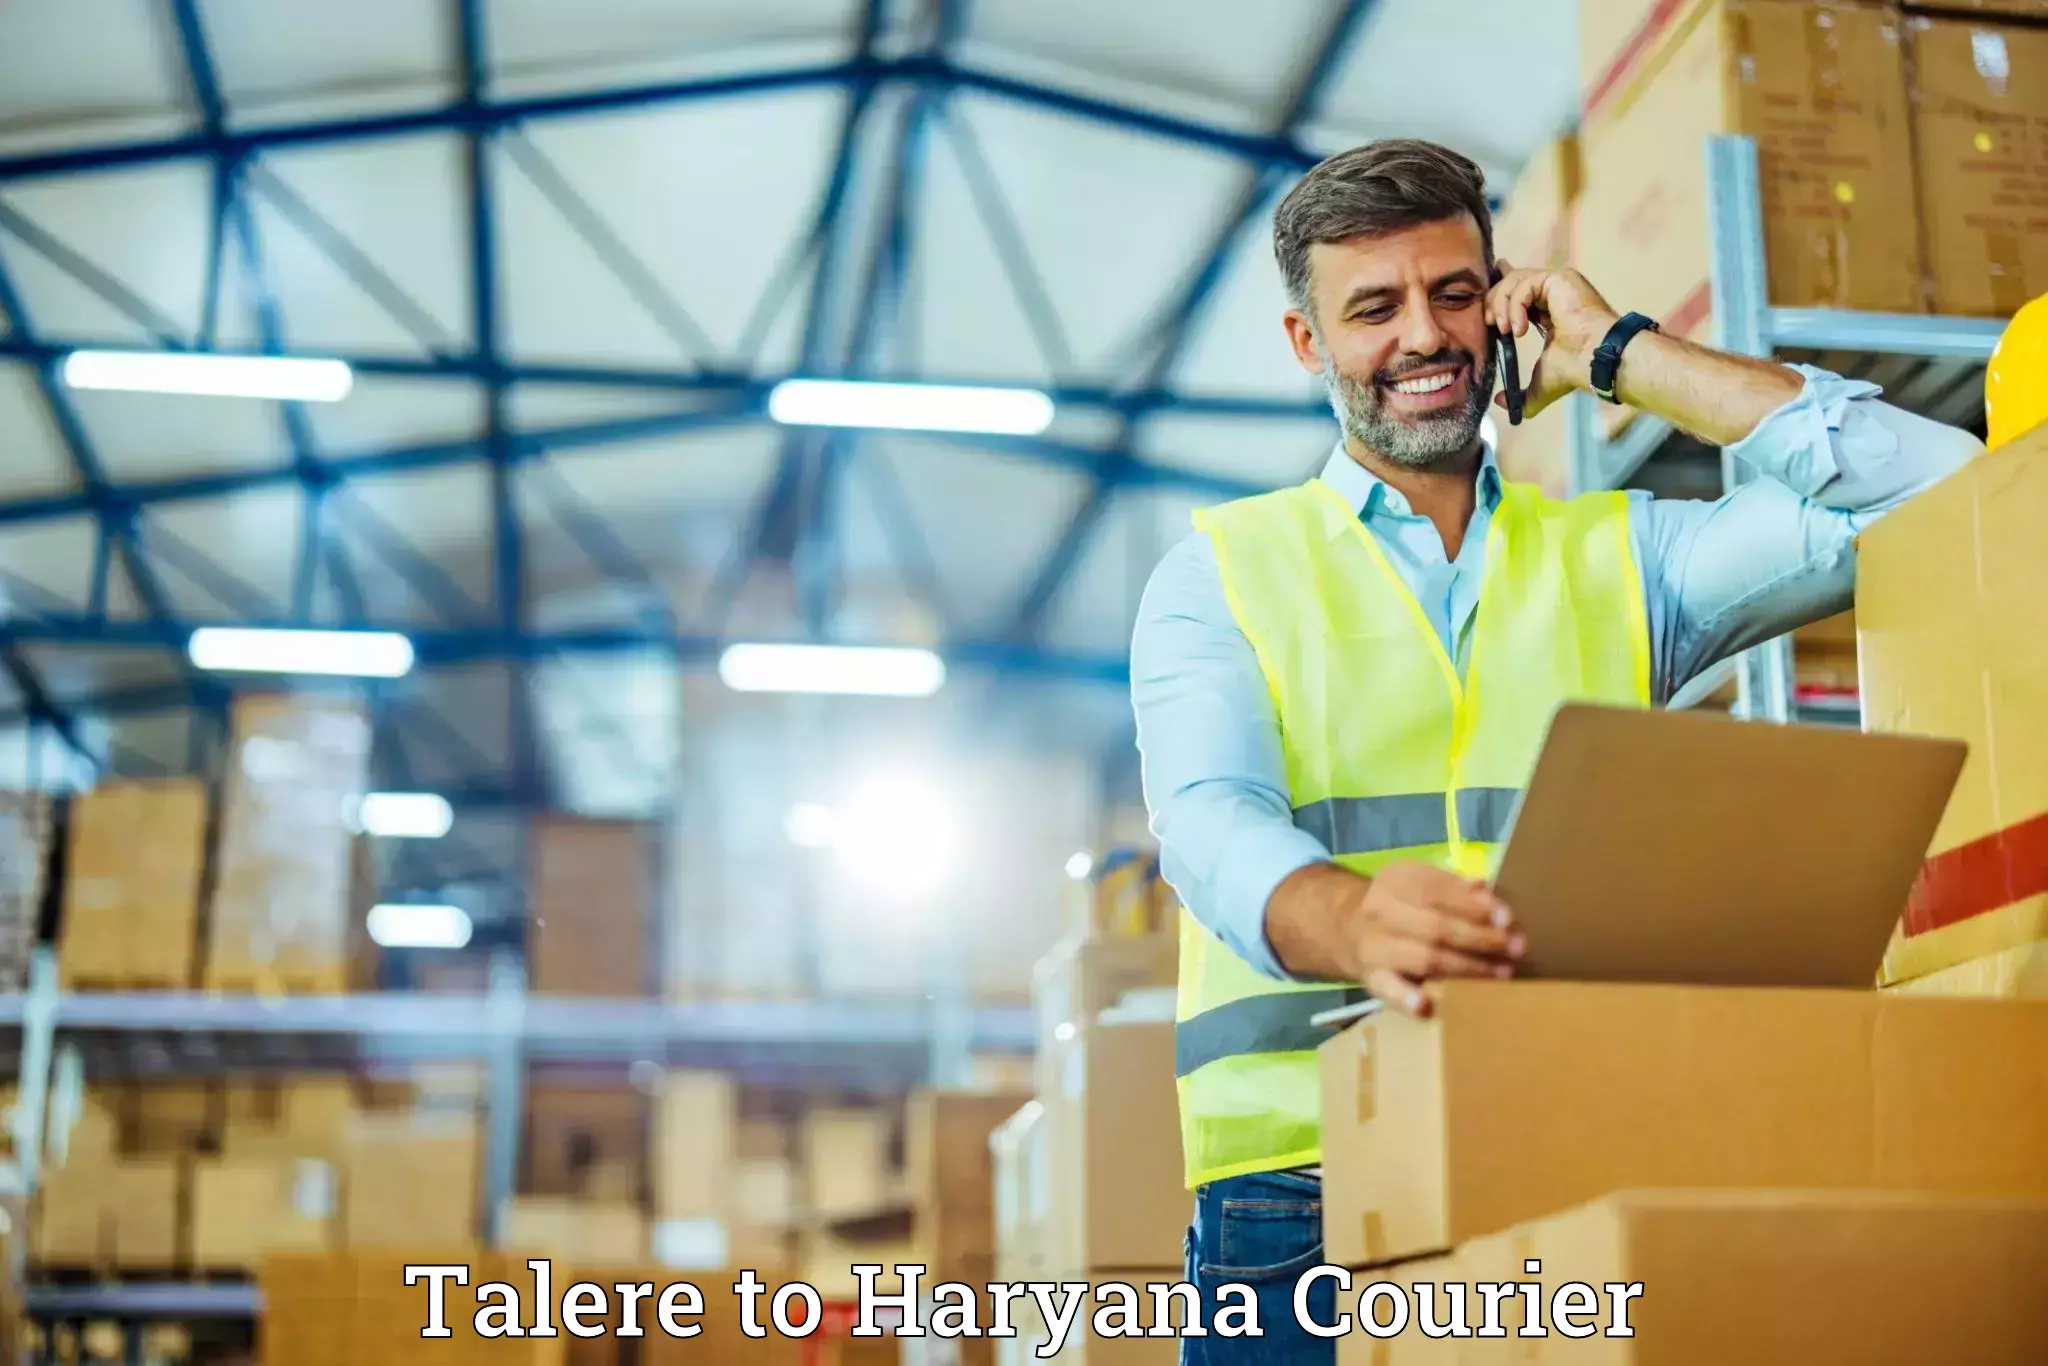 Baggage transport professionals Talere to Haryana